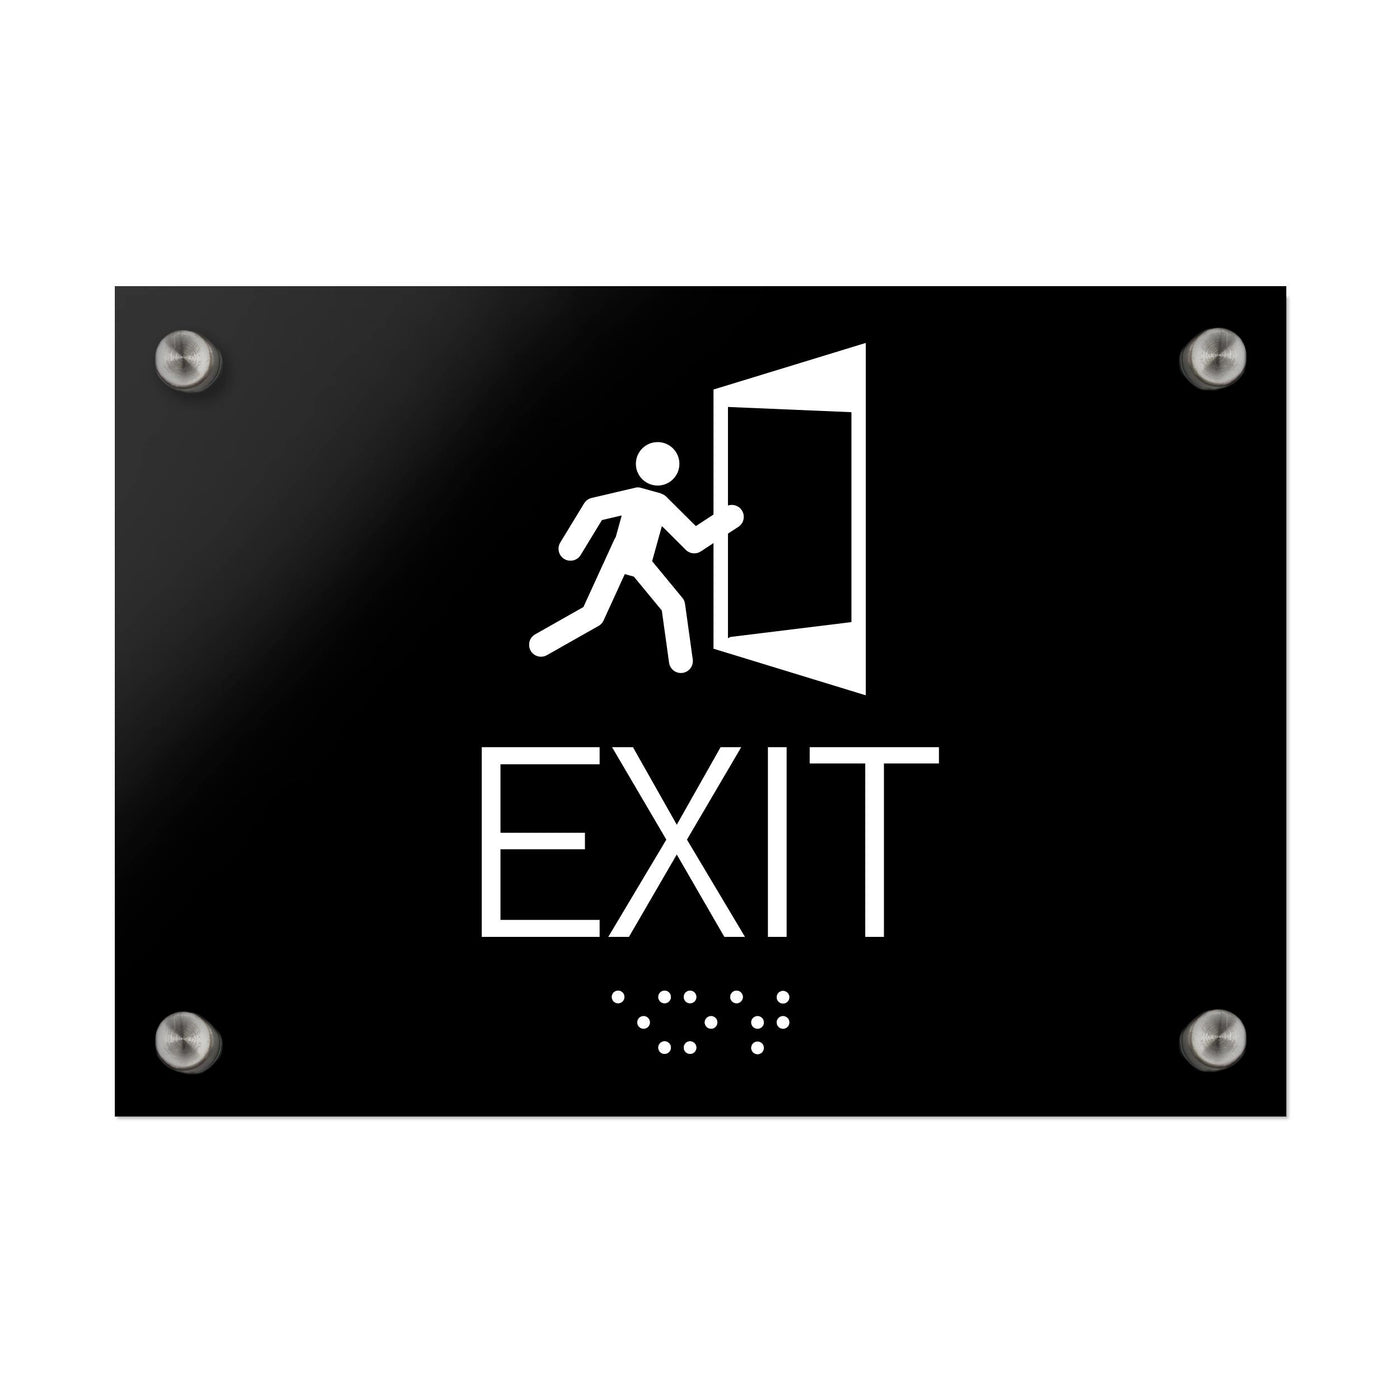 Information Signs - Exit Sign With Braille - Black Acrylic